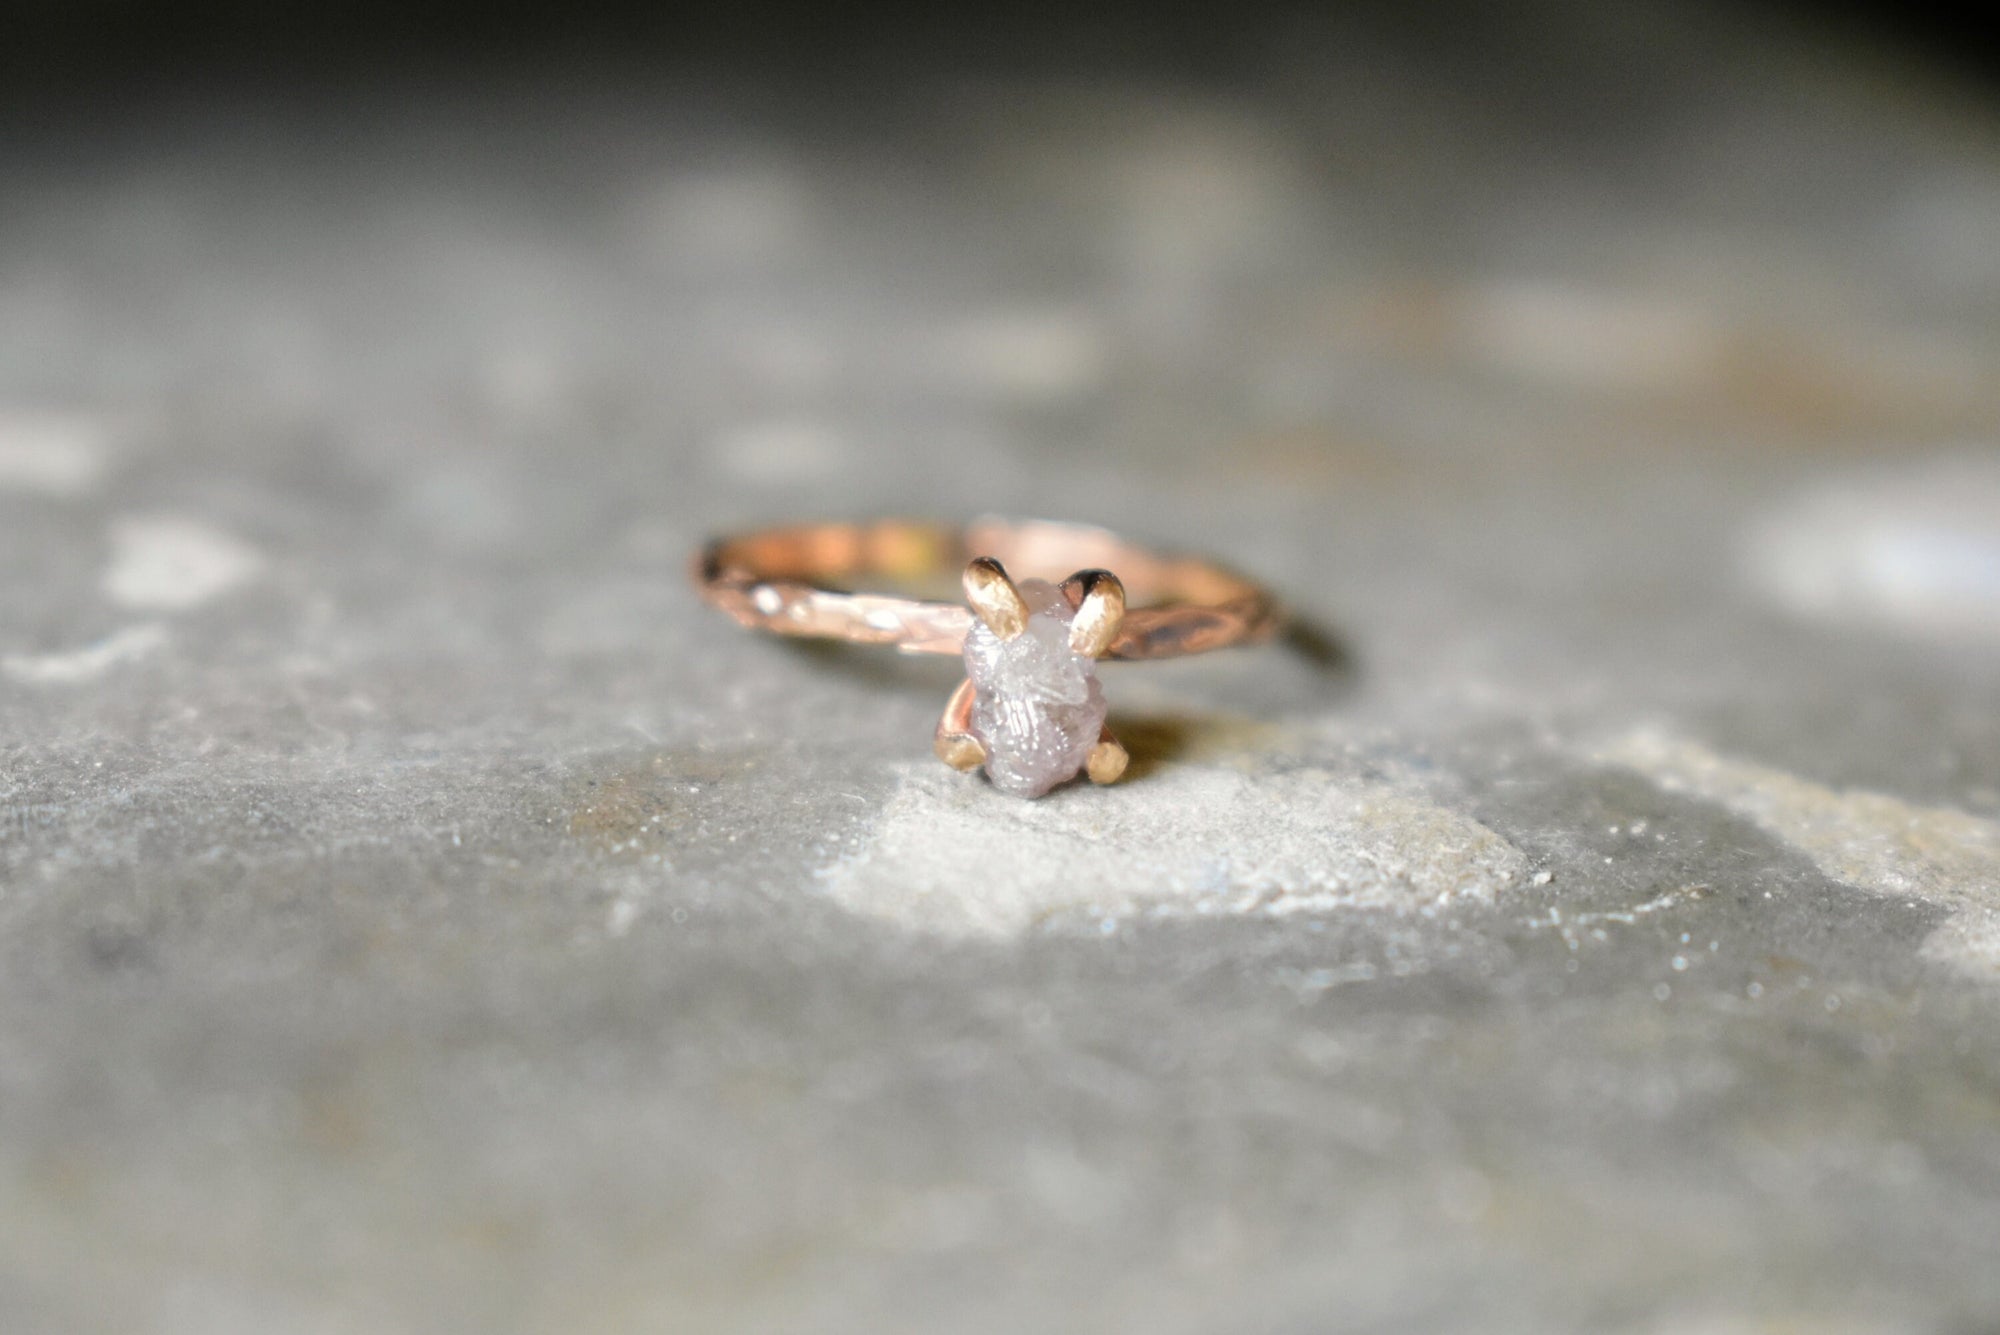 Rough Pink Diamond Ring, Uncut Diamond and Rose Gold Ring for Women, Chiseled Pink Gold Ring Band, Pronged Diamond Jewelry, April Birthstone